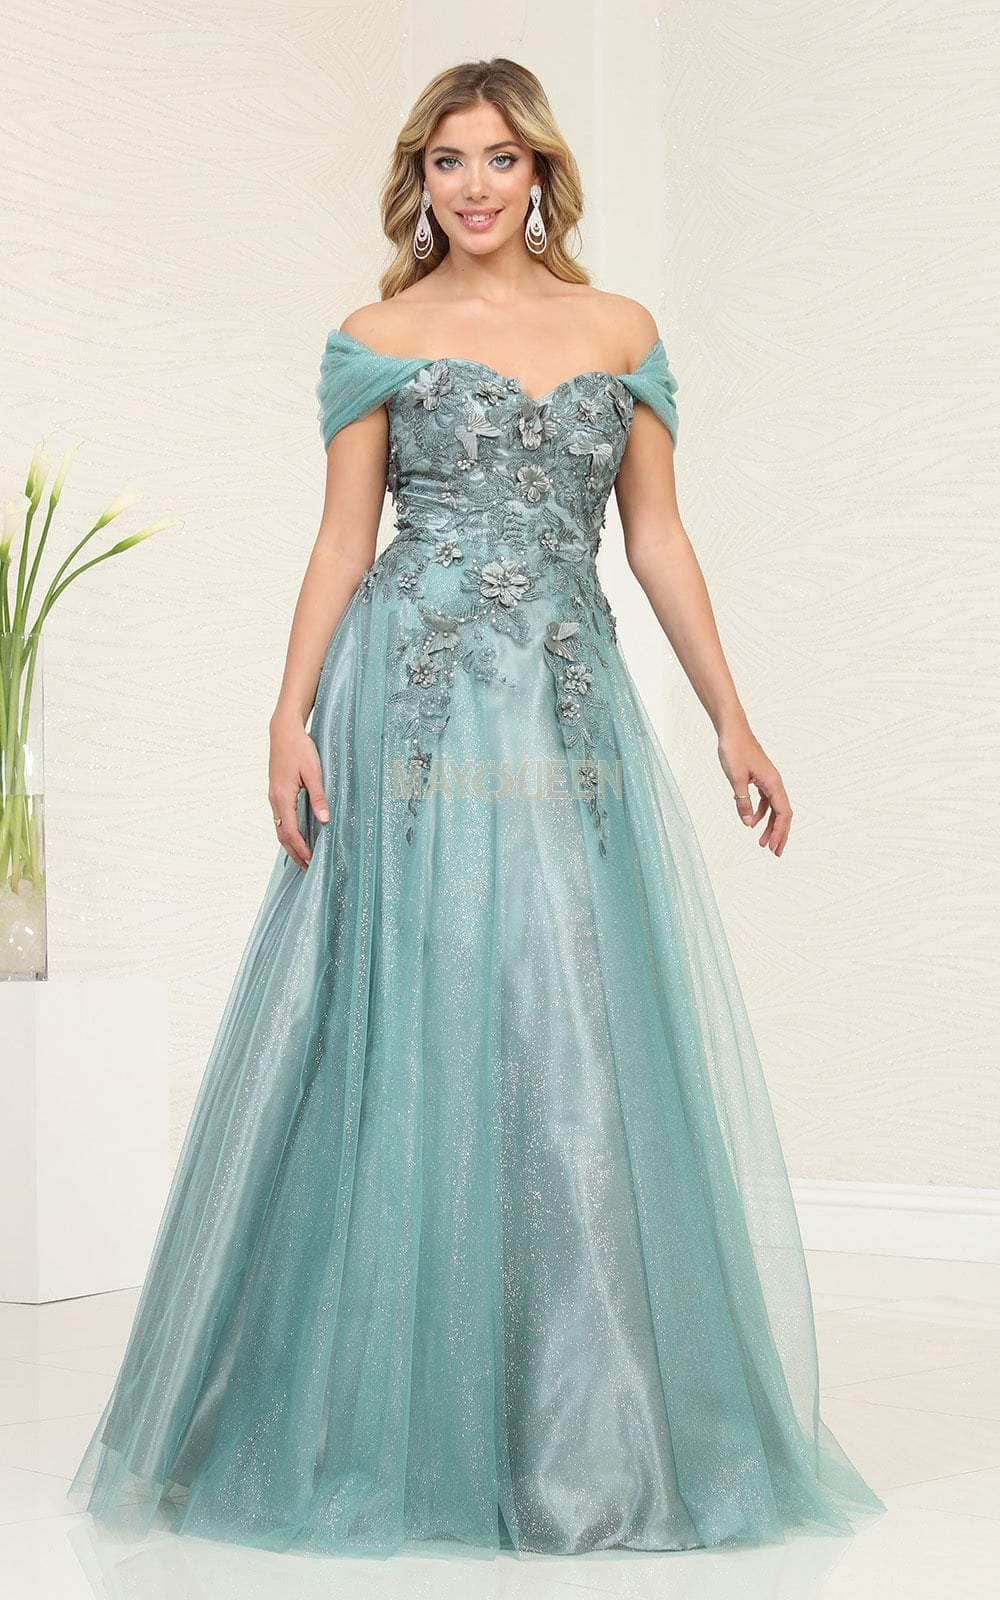 May Queen RQ8109 - Sweetheart A-Line Prom Gown Prom Dresses 4 / Sage